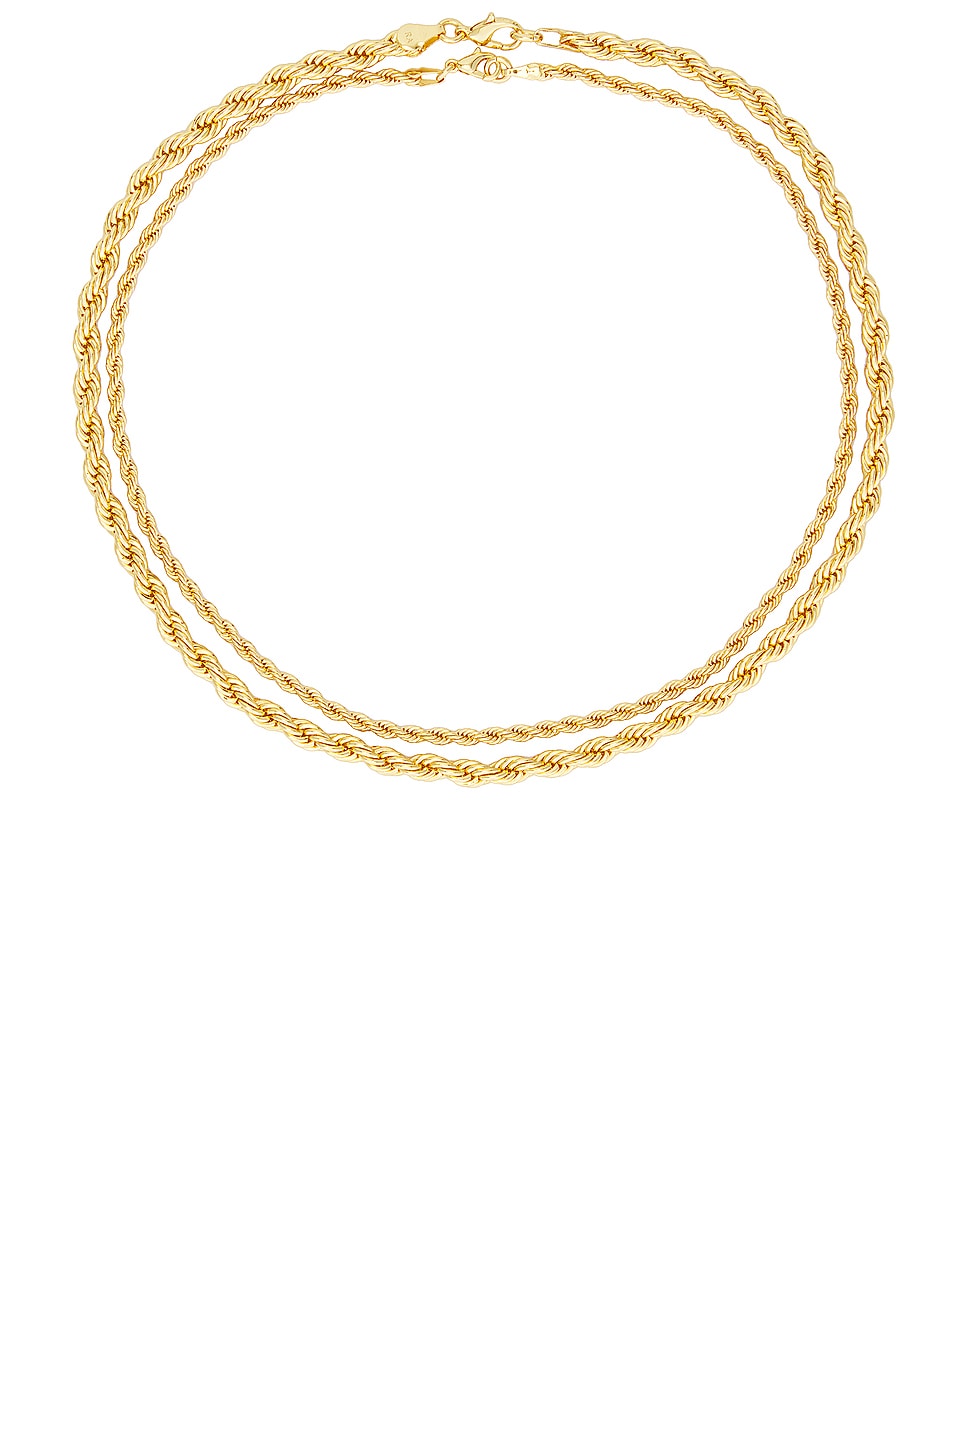 Image 1 of Roxanne Assoulin On The Ropes Necklace Duo in Shiny Gold